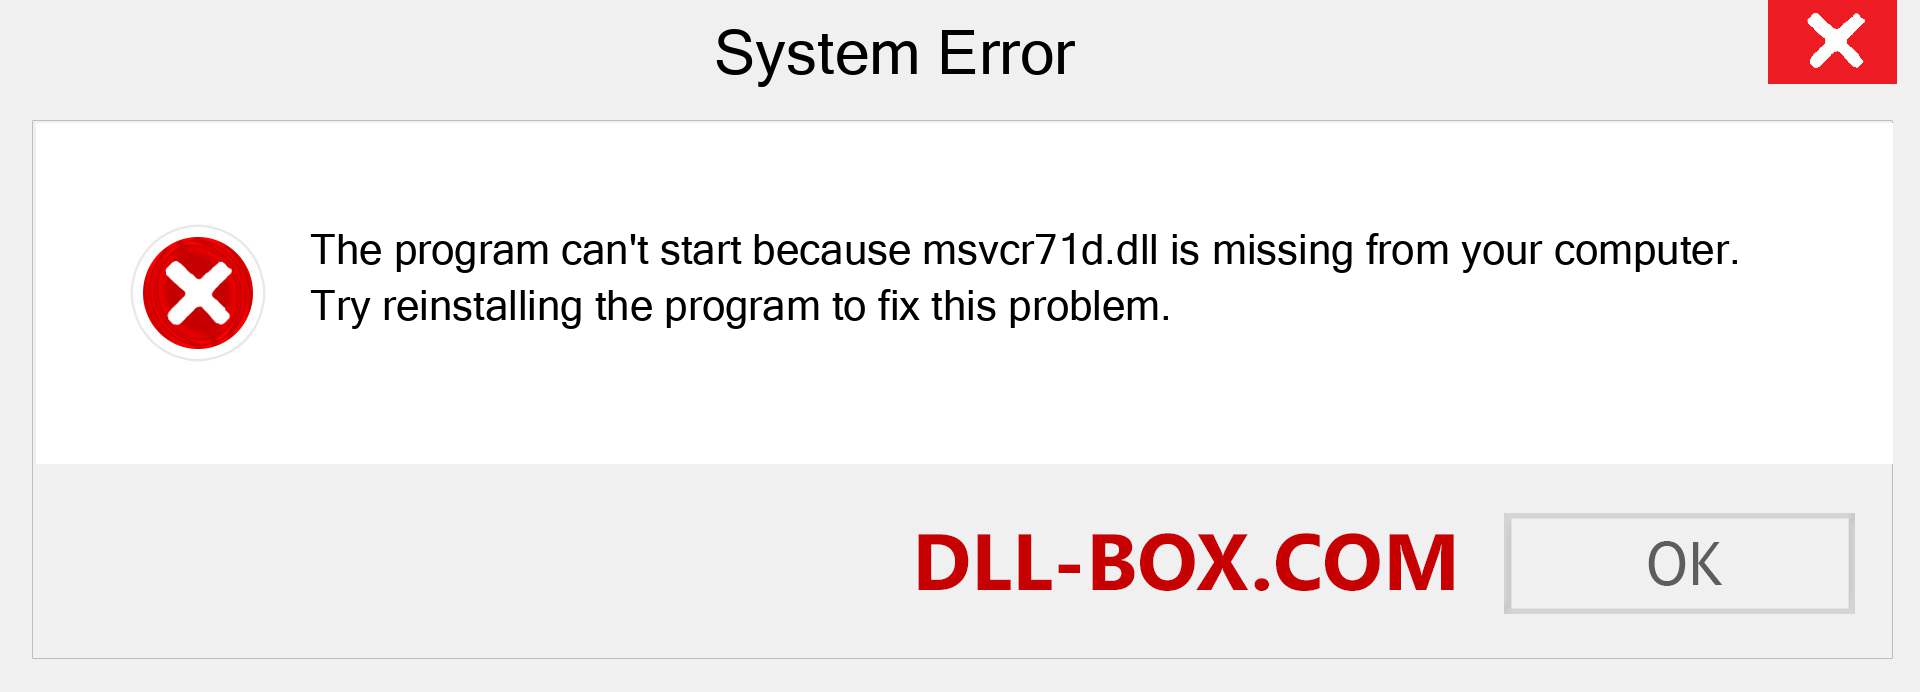  msvcr71d.dll file is missing?. Download for Windows 7, 8, 10 - Fix  msvcr71d dll Missing Error on Windows, photos, images